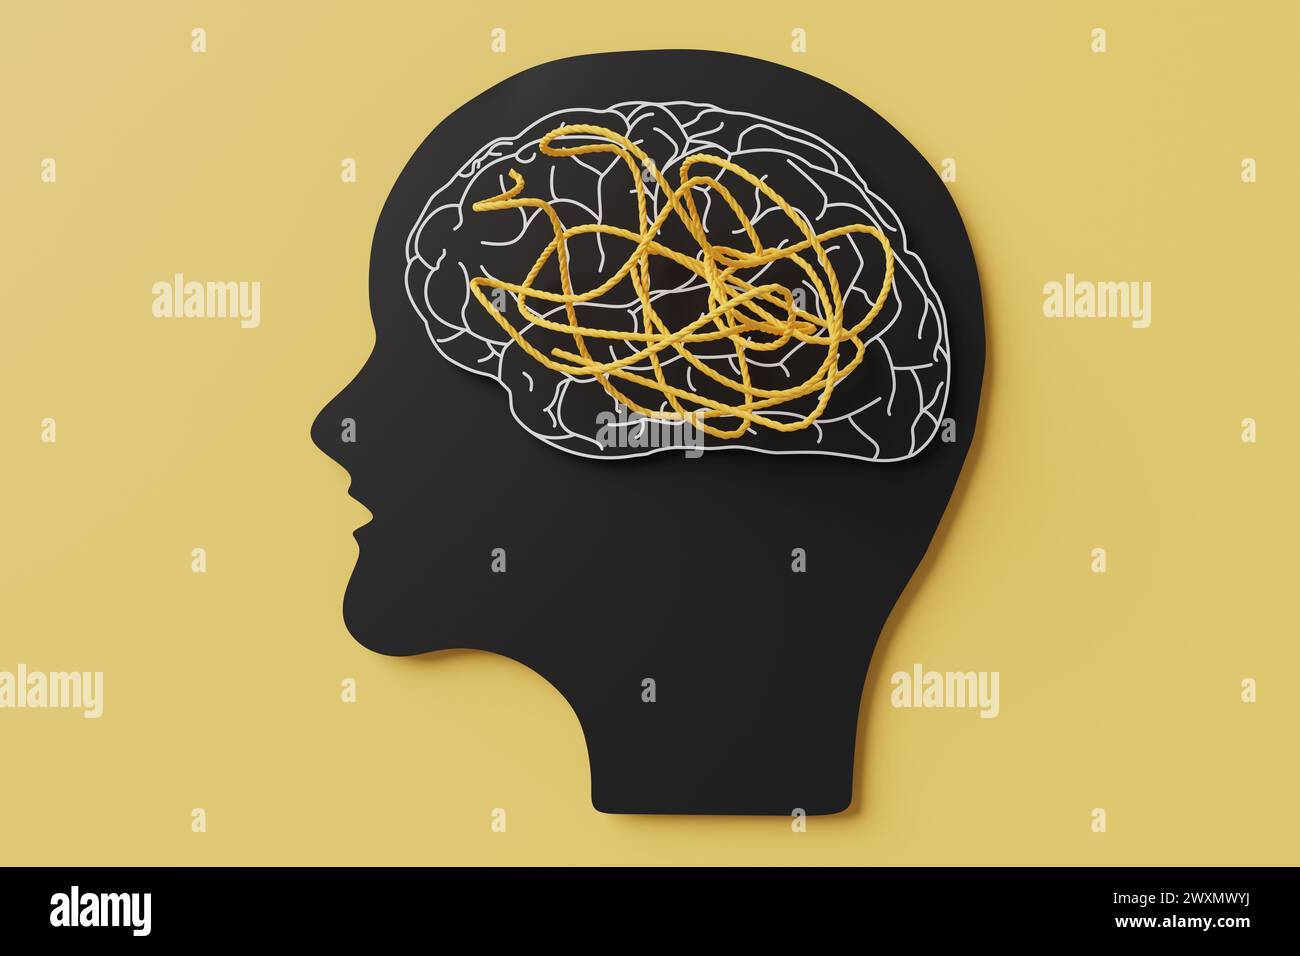 Orange ropes on a black paper cutting of a human head with a brain outlined in white on yellow background. Mental illness, psychology and ADHD Stock Photo